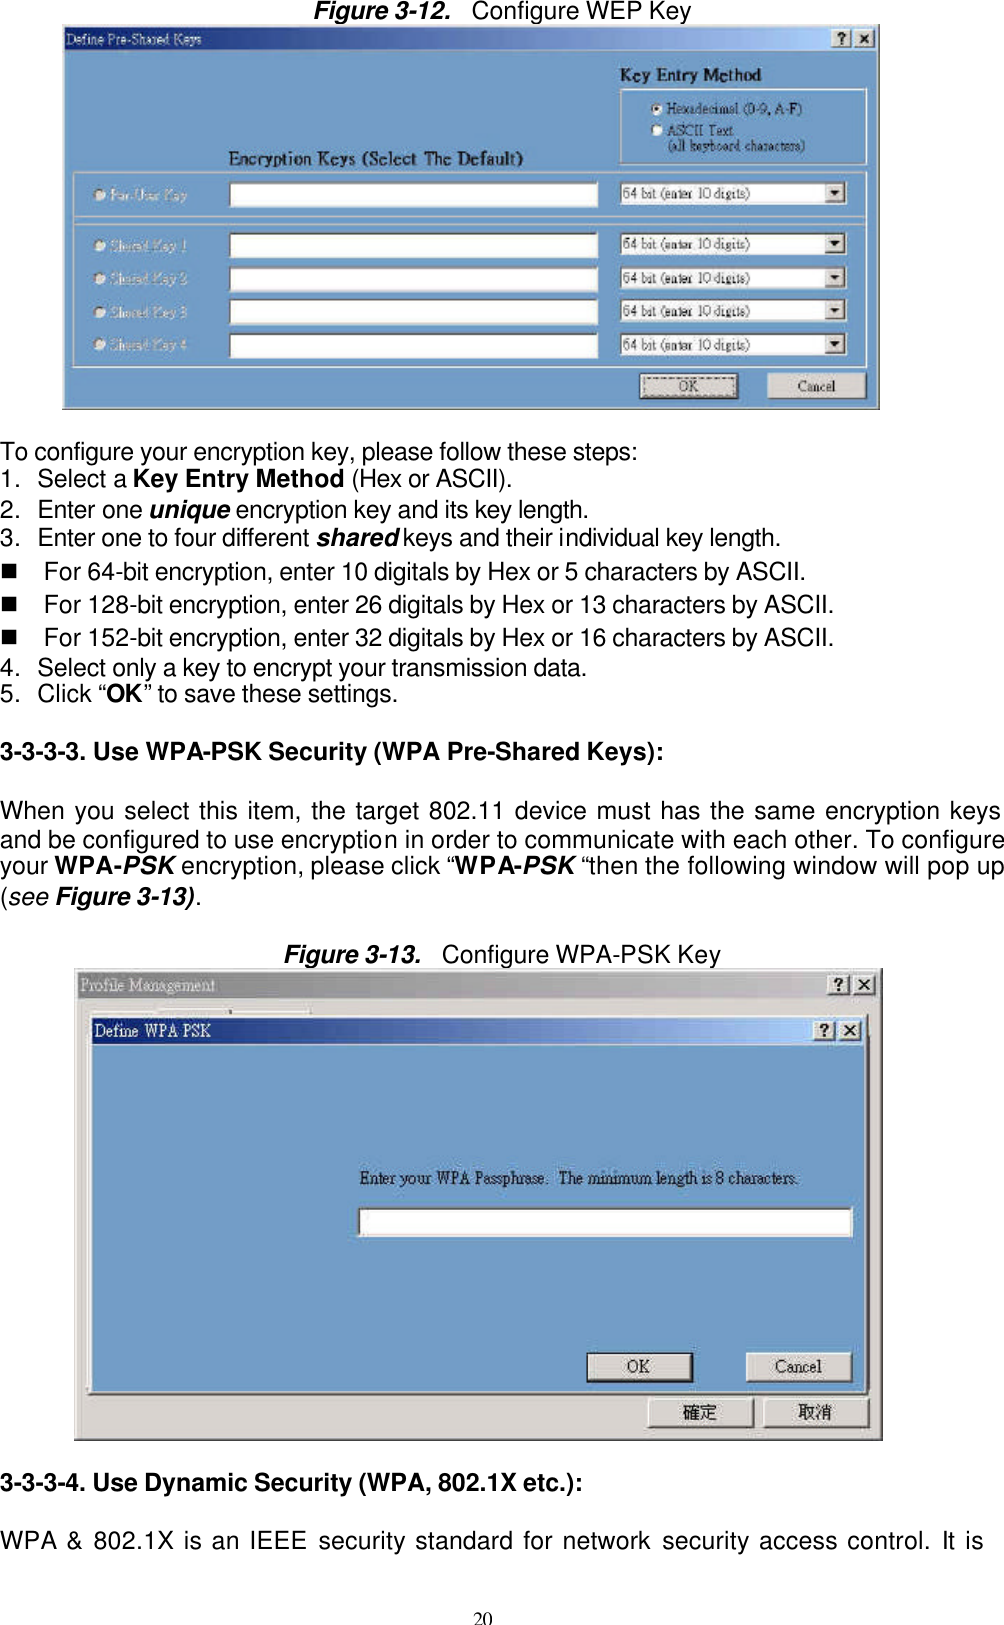 20  Figure 3-12.  Configure WEP Key   To configure your encryption key, please follow these steps: 1. Select a Key Entry Method (Hex or ASCII). 2. Enter one unique encryption key and its key length. 3. Enter one to four different shared keys and their individual key length.   n For 64-bit encryption, enter 10 digitals by Hex or 5 characters by ASCII. n For 128-bit encryption, enter 26 digitals by Hex or 13 characters by ASCII. n For 152-bit encryption, enter 32 digitals by Hex or 16 characters by ASCII. 4. Select only a key to encrypt your transmission data. 5. Click “OK” to save these settings.  3-3-3-3. Use WPA-PSK Security (WPA Pre-Shared Keys):  When you select this item, the target 802.11 device must has the same encryption keys and be configured to use encryption in order to communicate with each other. To configure your WPA-PSK encryption, please click “WPA-PSK “then the following window will pop up (see Figure 3-13).  Figure 3-13.  Configure WPA-PSK Key          3-3-3-4. Use Dynamic Security (WPA, 802.1X etc.):  WPA &amp; 802.1X is an IEEE security standard for network security access control. It is 